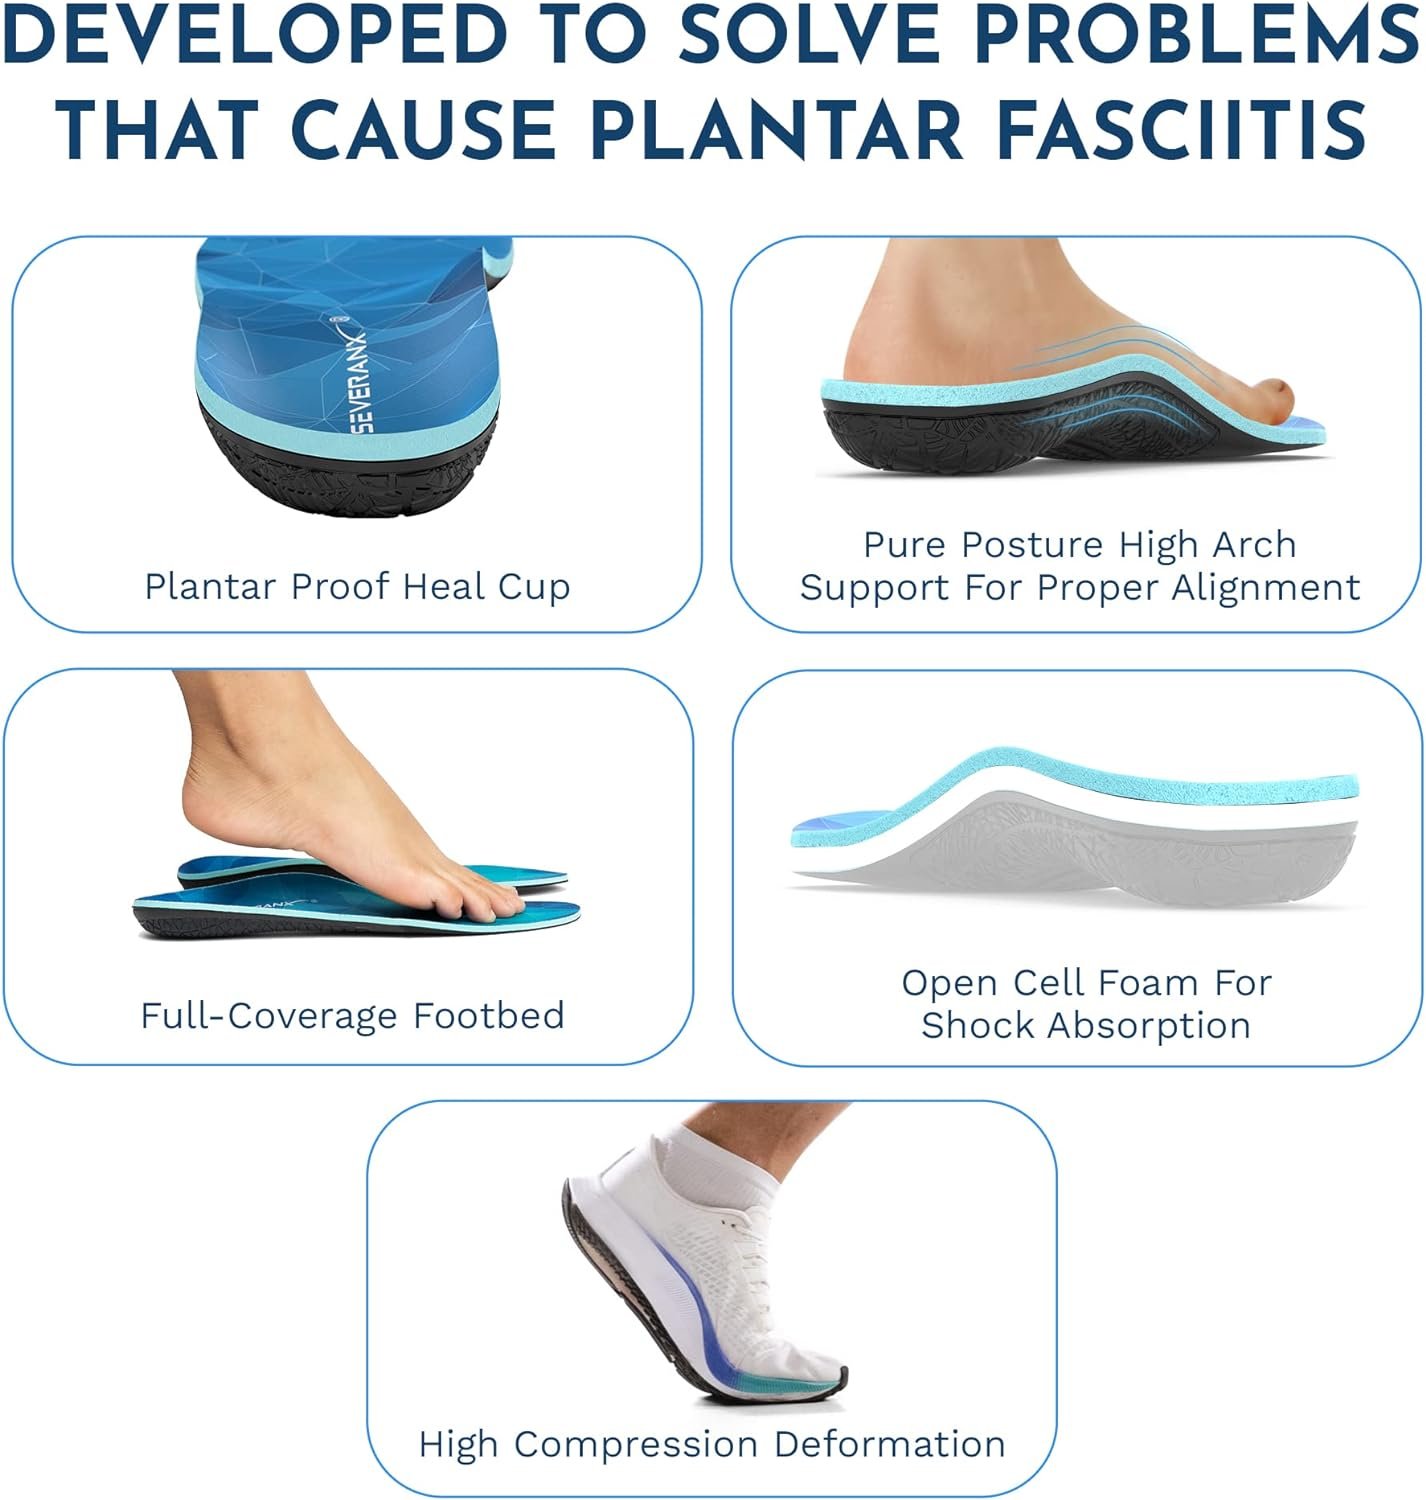 NASA Grade Plantar Fasciitis Insoles – High Arch Support Insoles Men Women - Shoe Insoles for Plantar Fasciitis Relief - Absorb Shock  Relieve Flat Foot Pain - Orthotics Inserts for Work  Standing